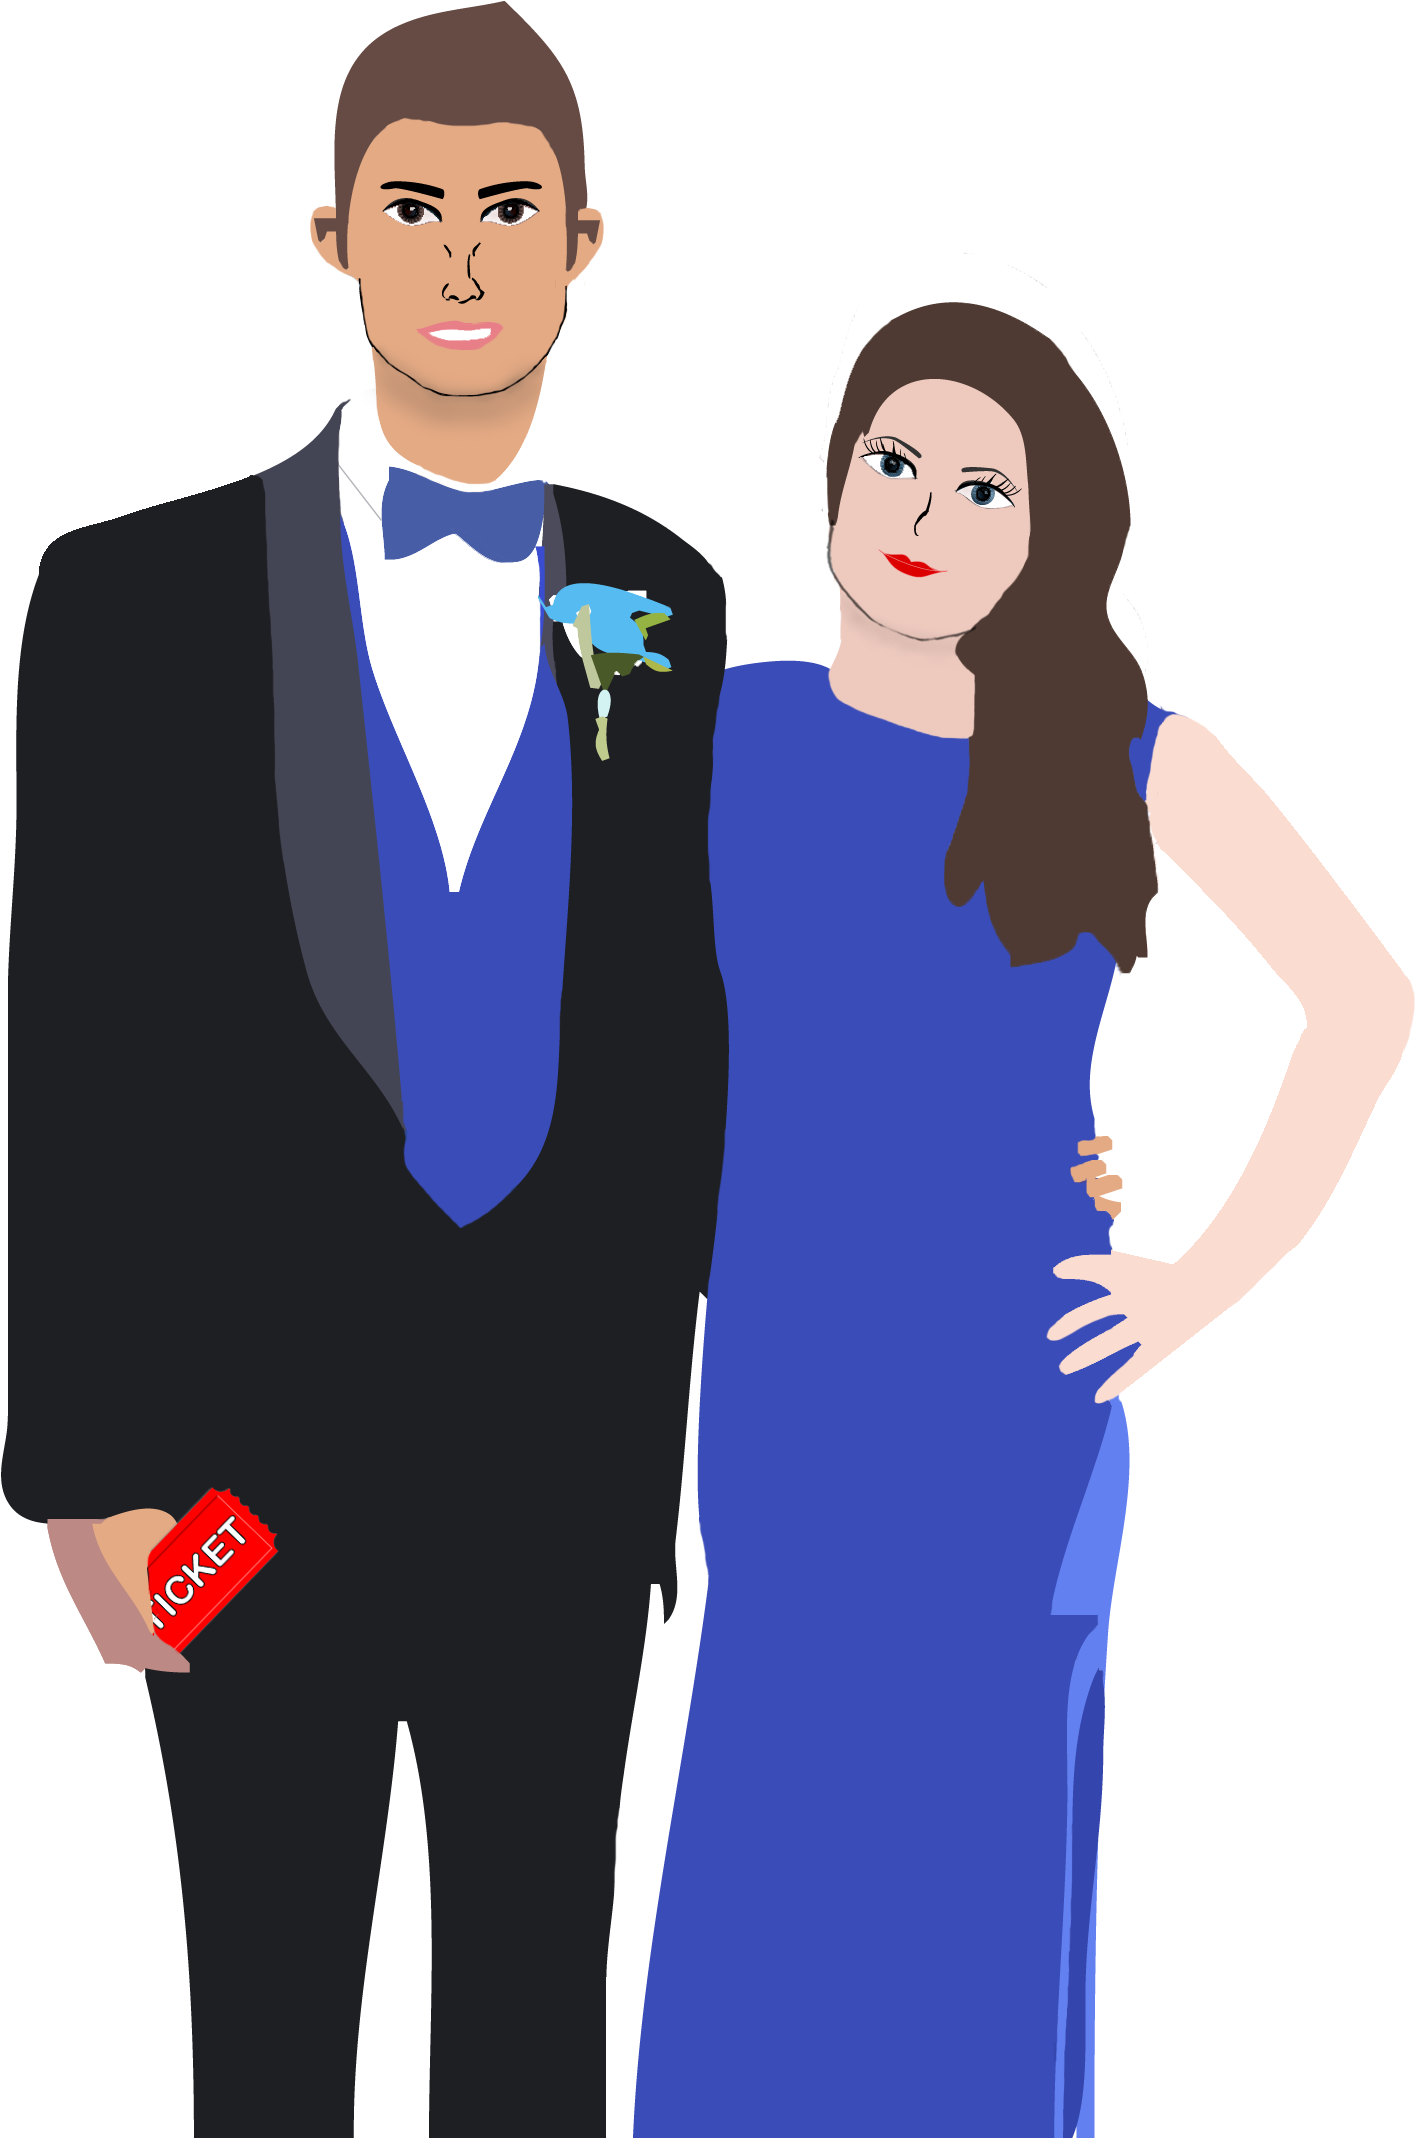 A Man And Woman In Formal Attire